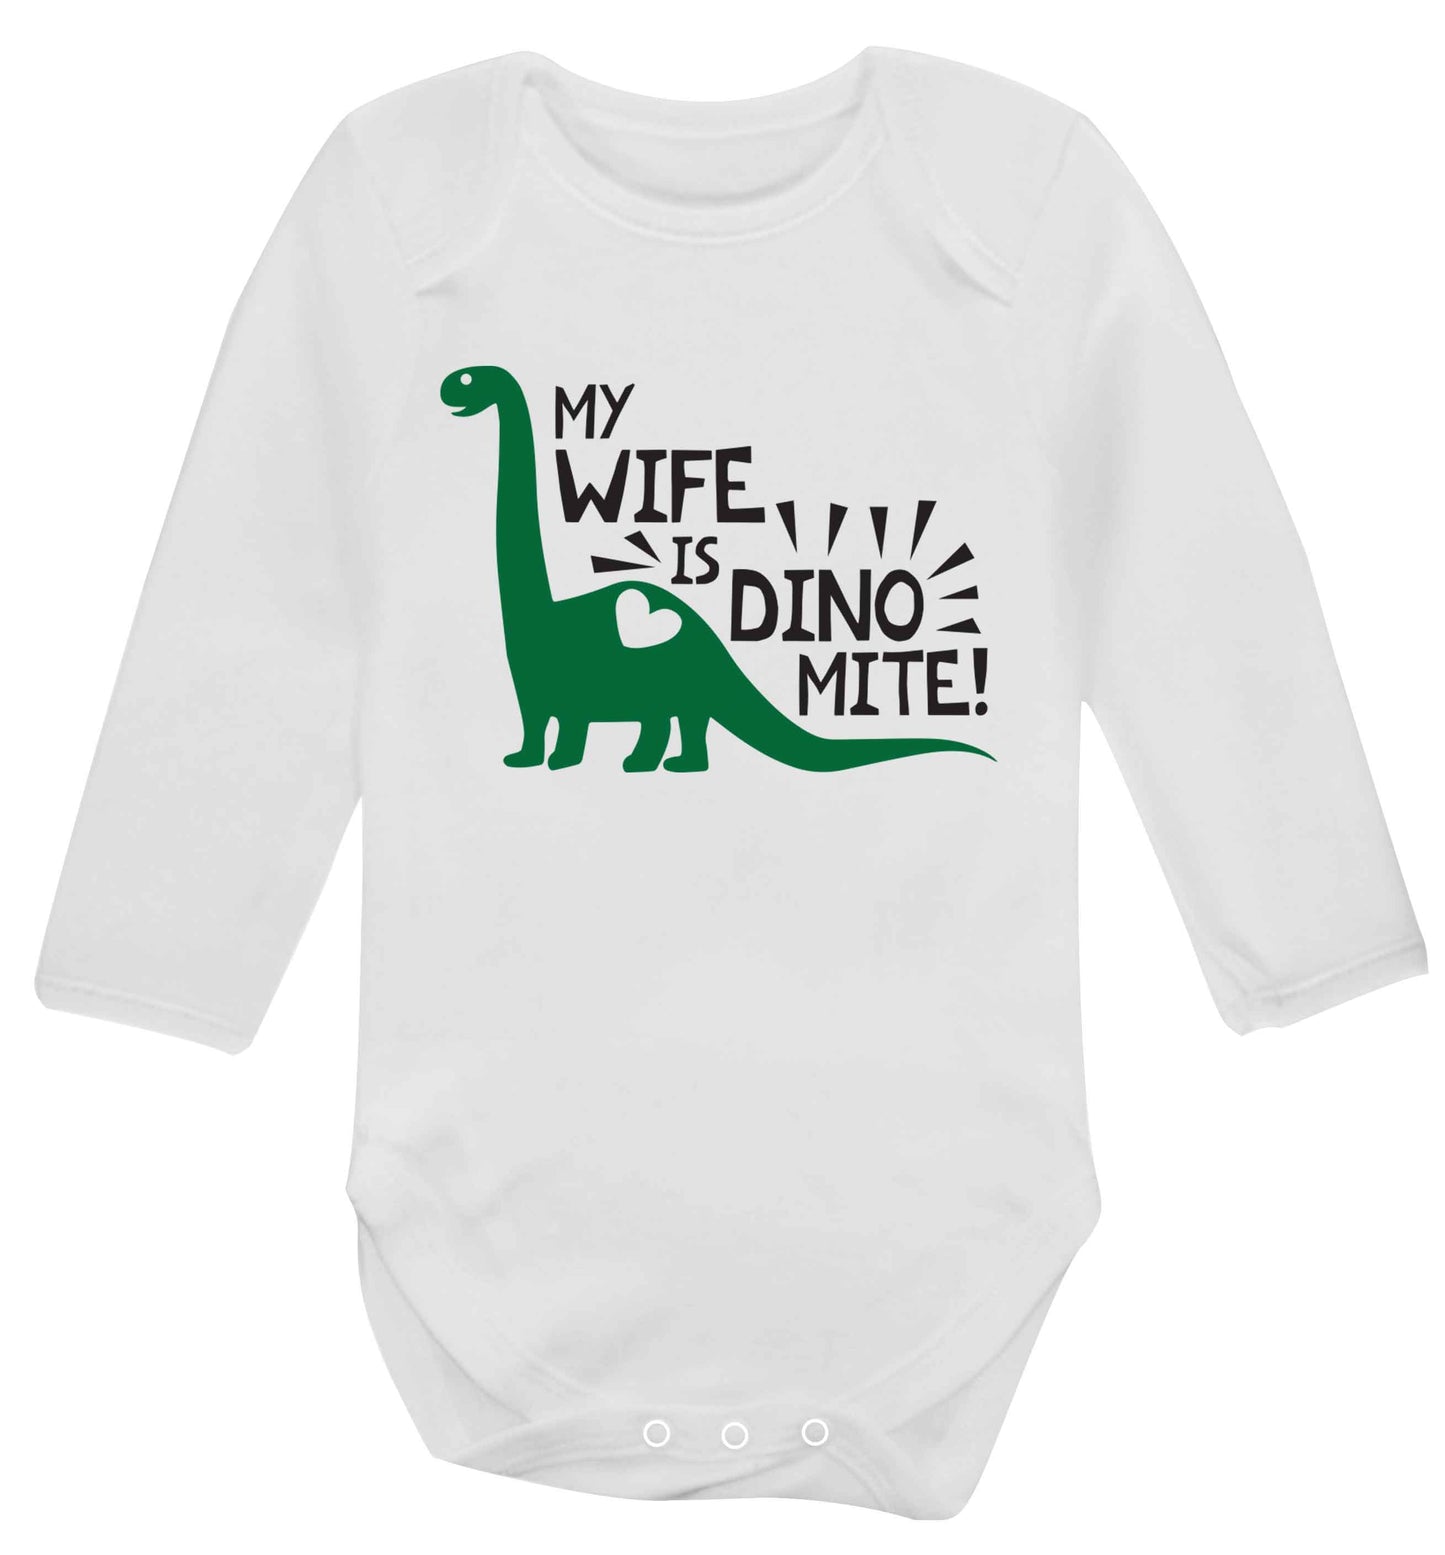 My wife is dinomite! Baby Vest long sleeved white 6-12 months